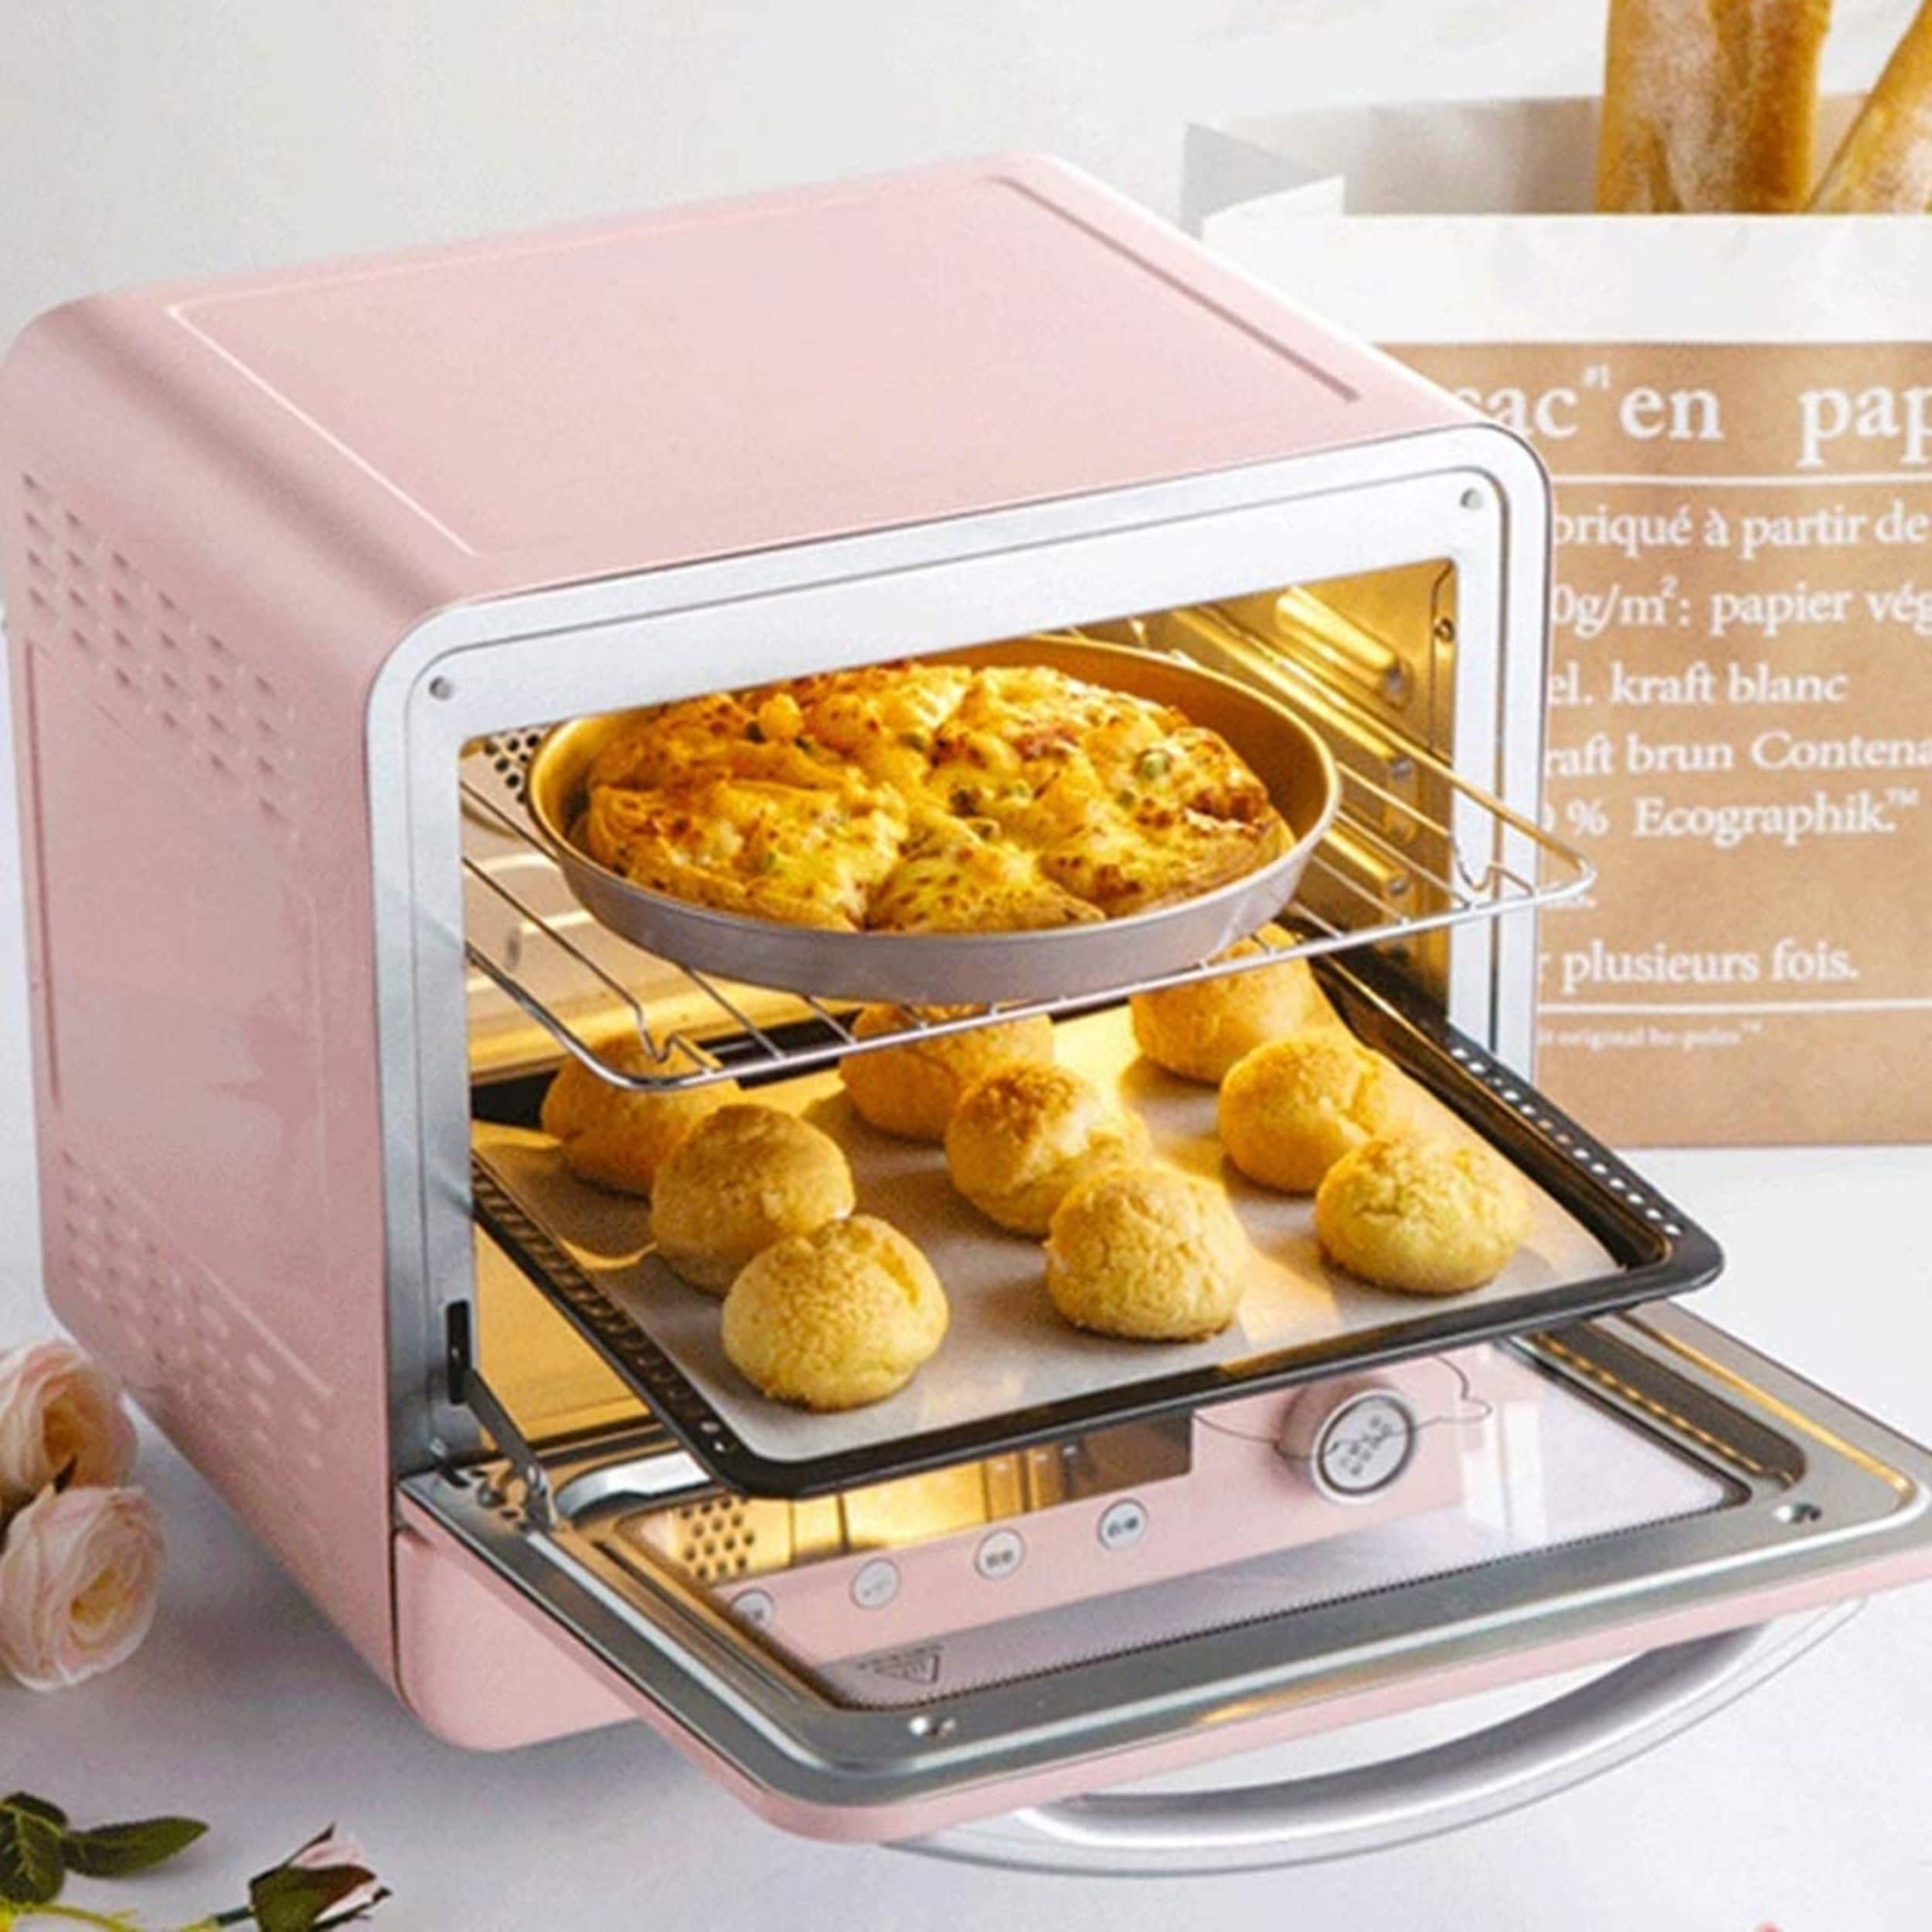 https://ak1.ostkcdn.com/images/products/is/images/direct/28c1c99e5374db4baa8de4fa6afc396b7e3789bc/20L-2-Layer-Mini-Oven%2C-1300W-Small-Electric-Oven-Stainless-Steel%2C-Pink.jpg